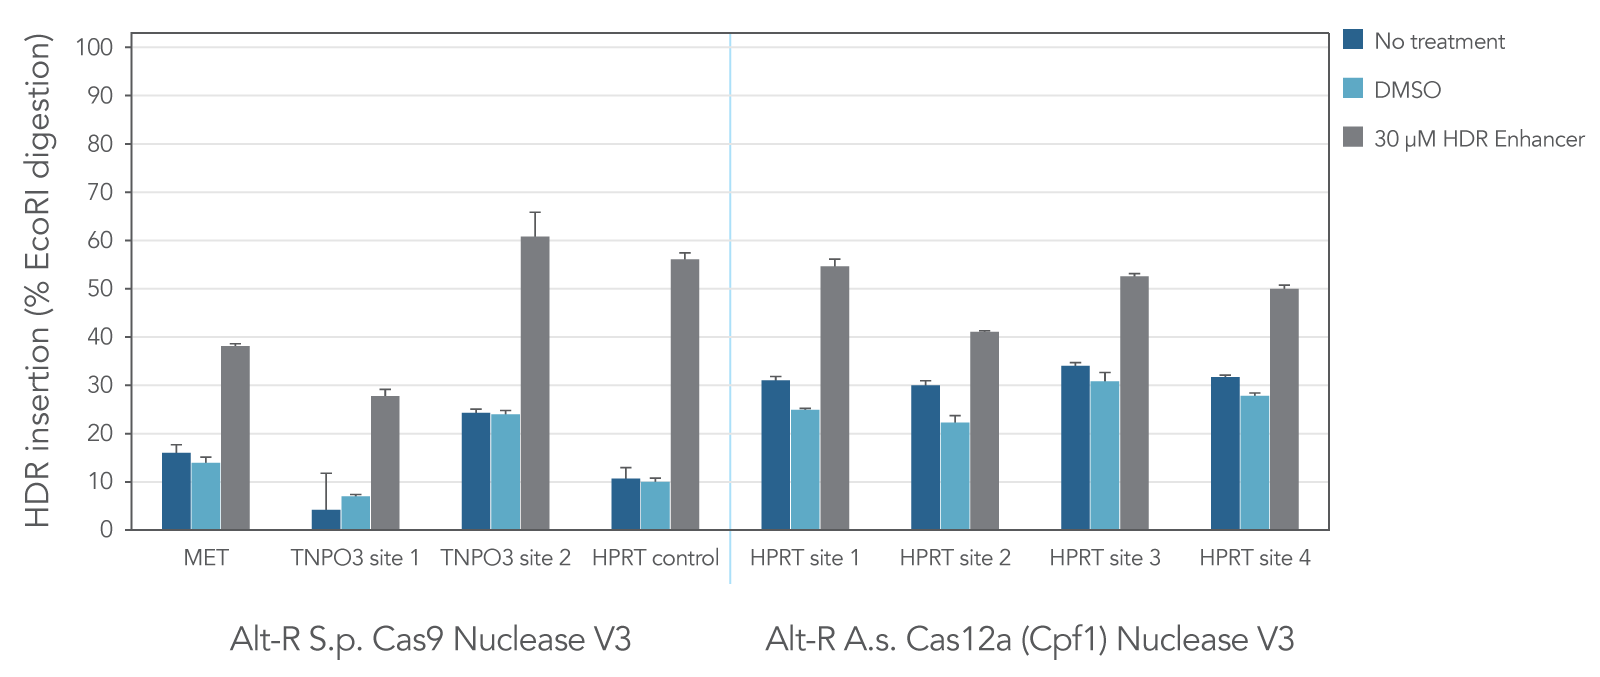 Alt-R HDR Enhancer improves rates of HDR mediated by either S.p. Cas9 or A.s. Cas12a nuclease